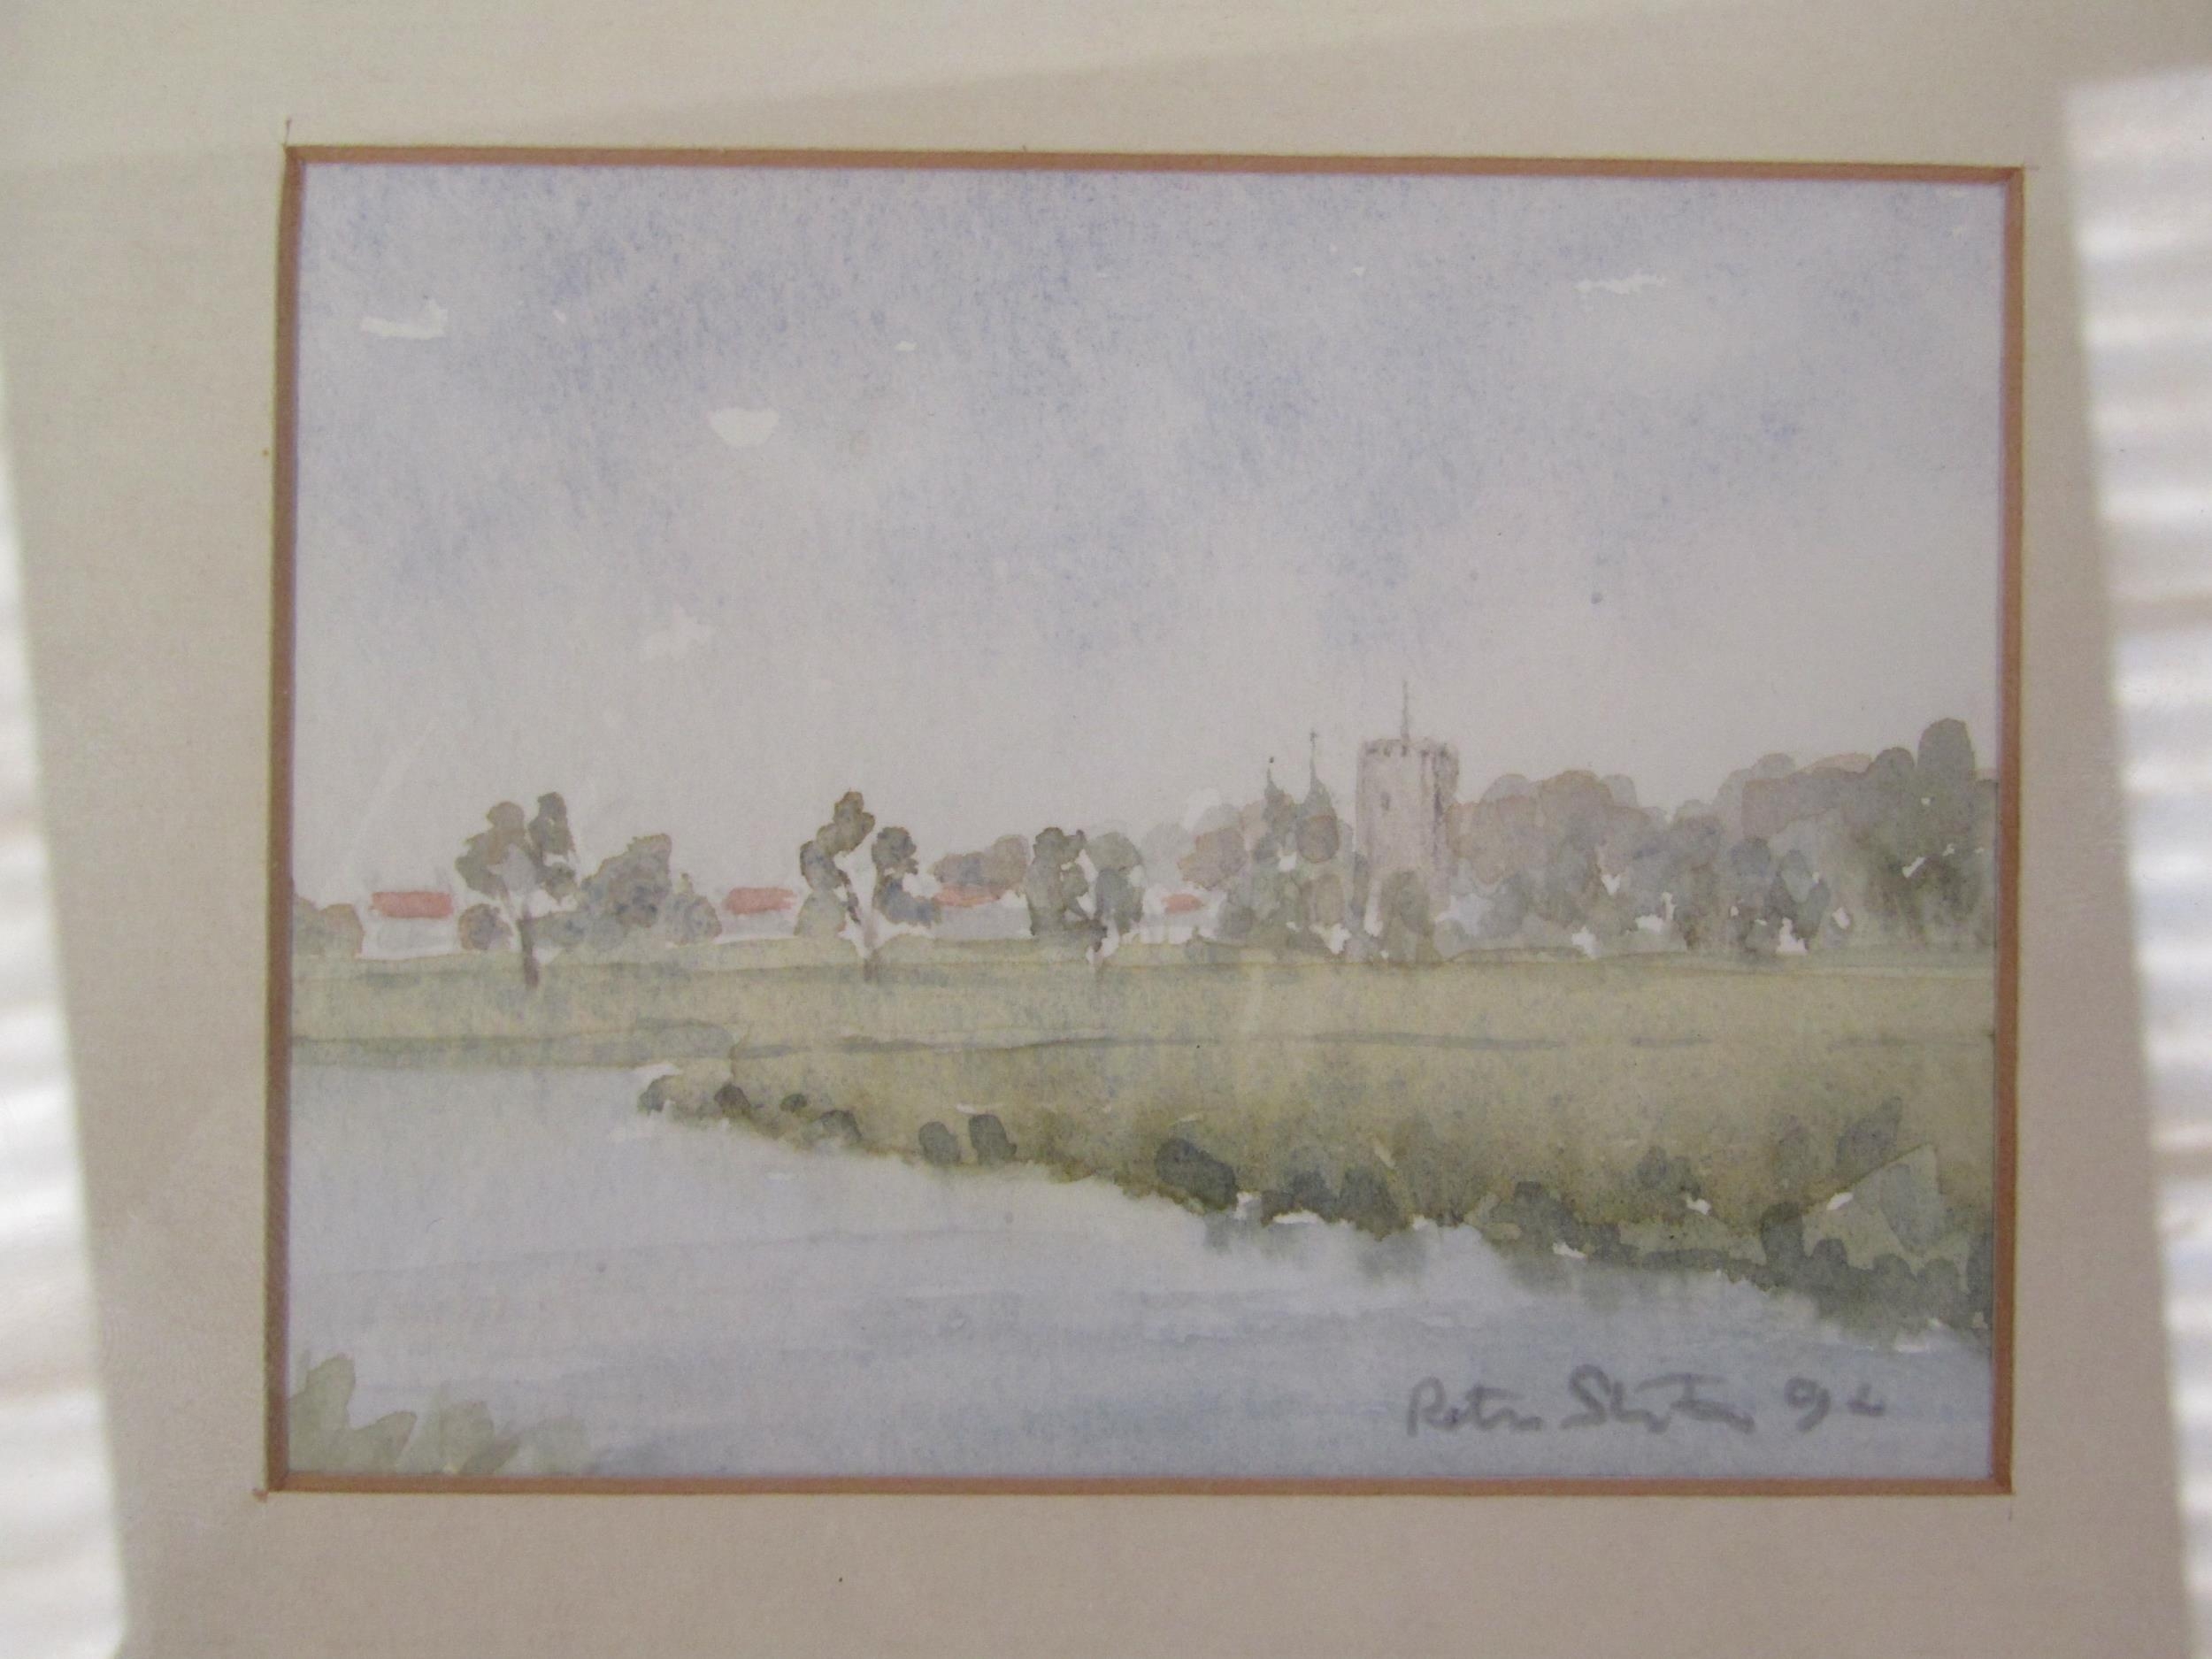 PETER STANTON: Two miniature watercolours of local scenes, Burnham Mill and River Bure, Buxton, - Image 3 of 3